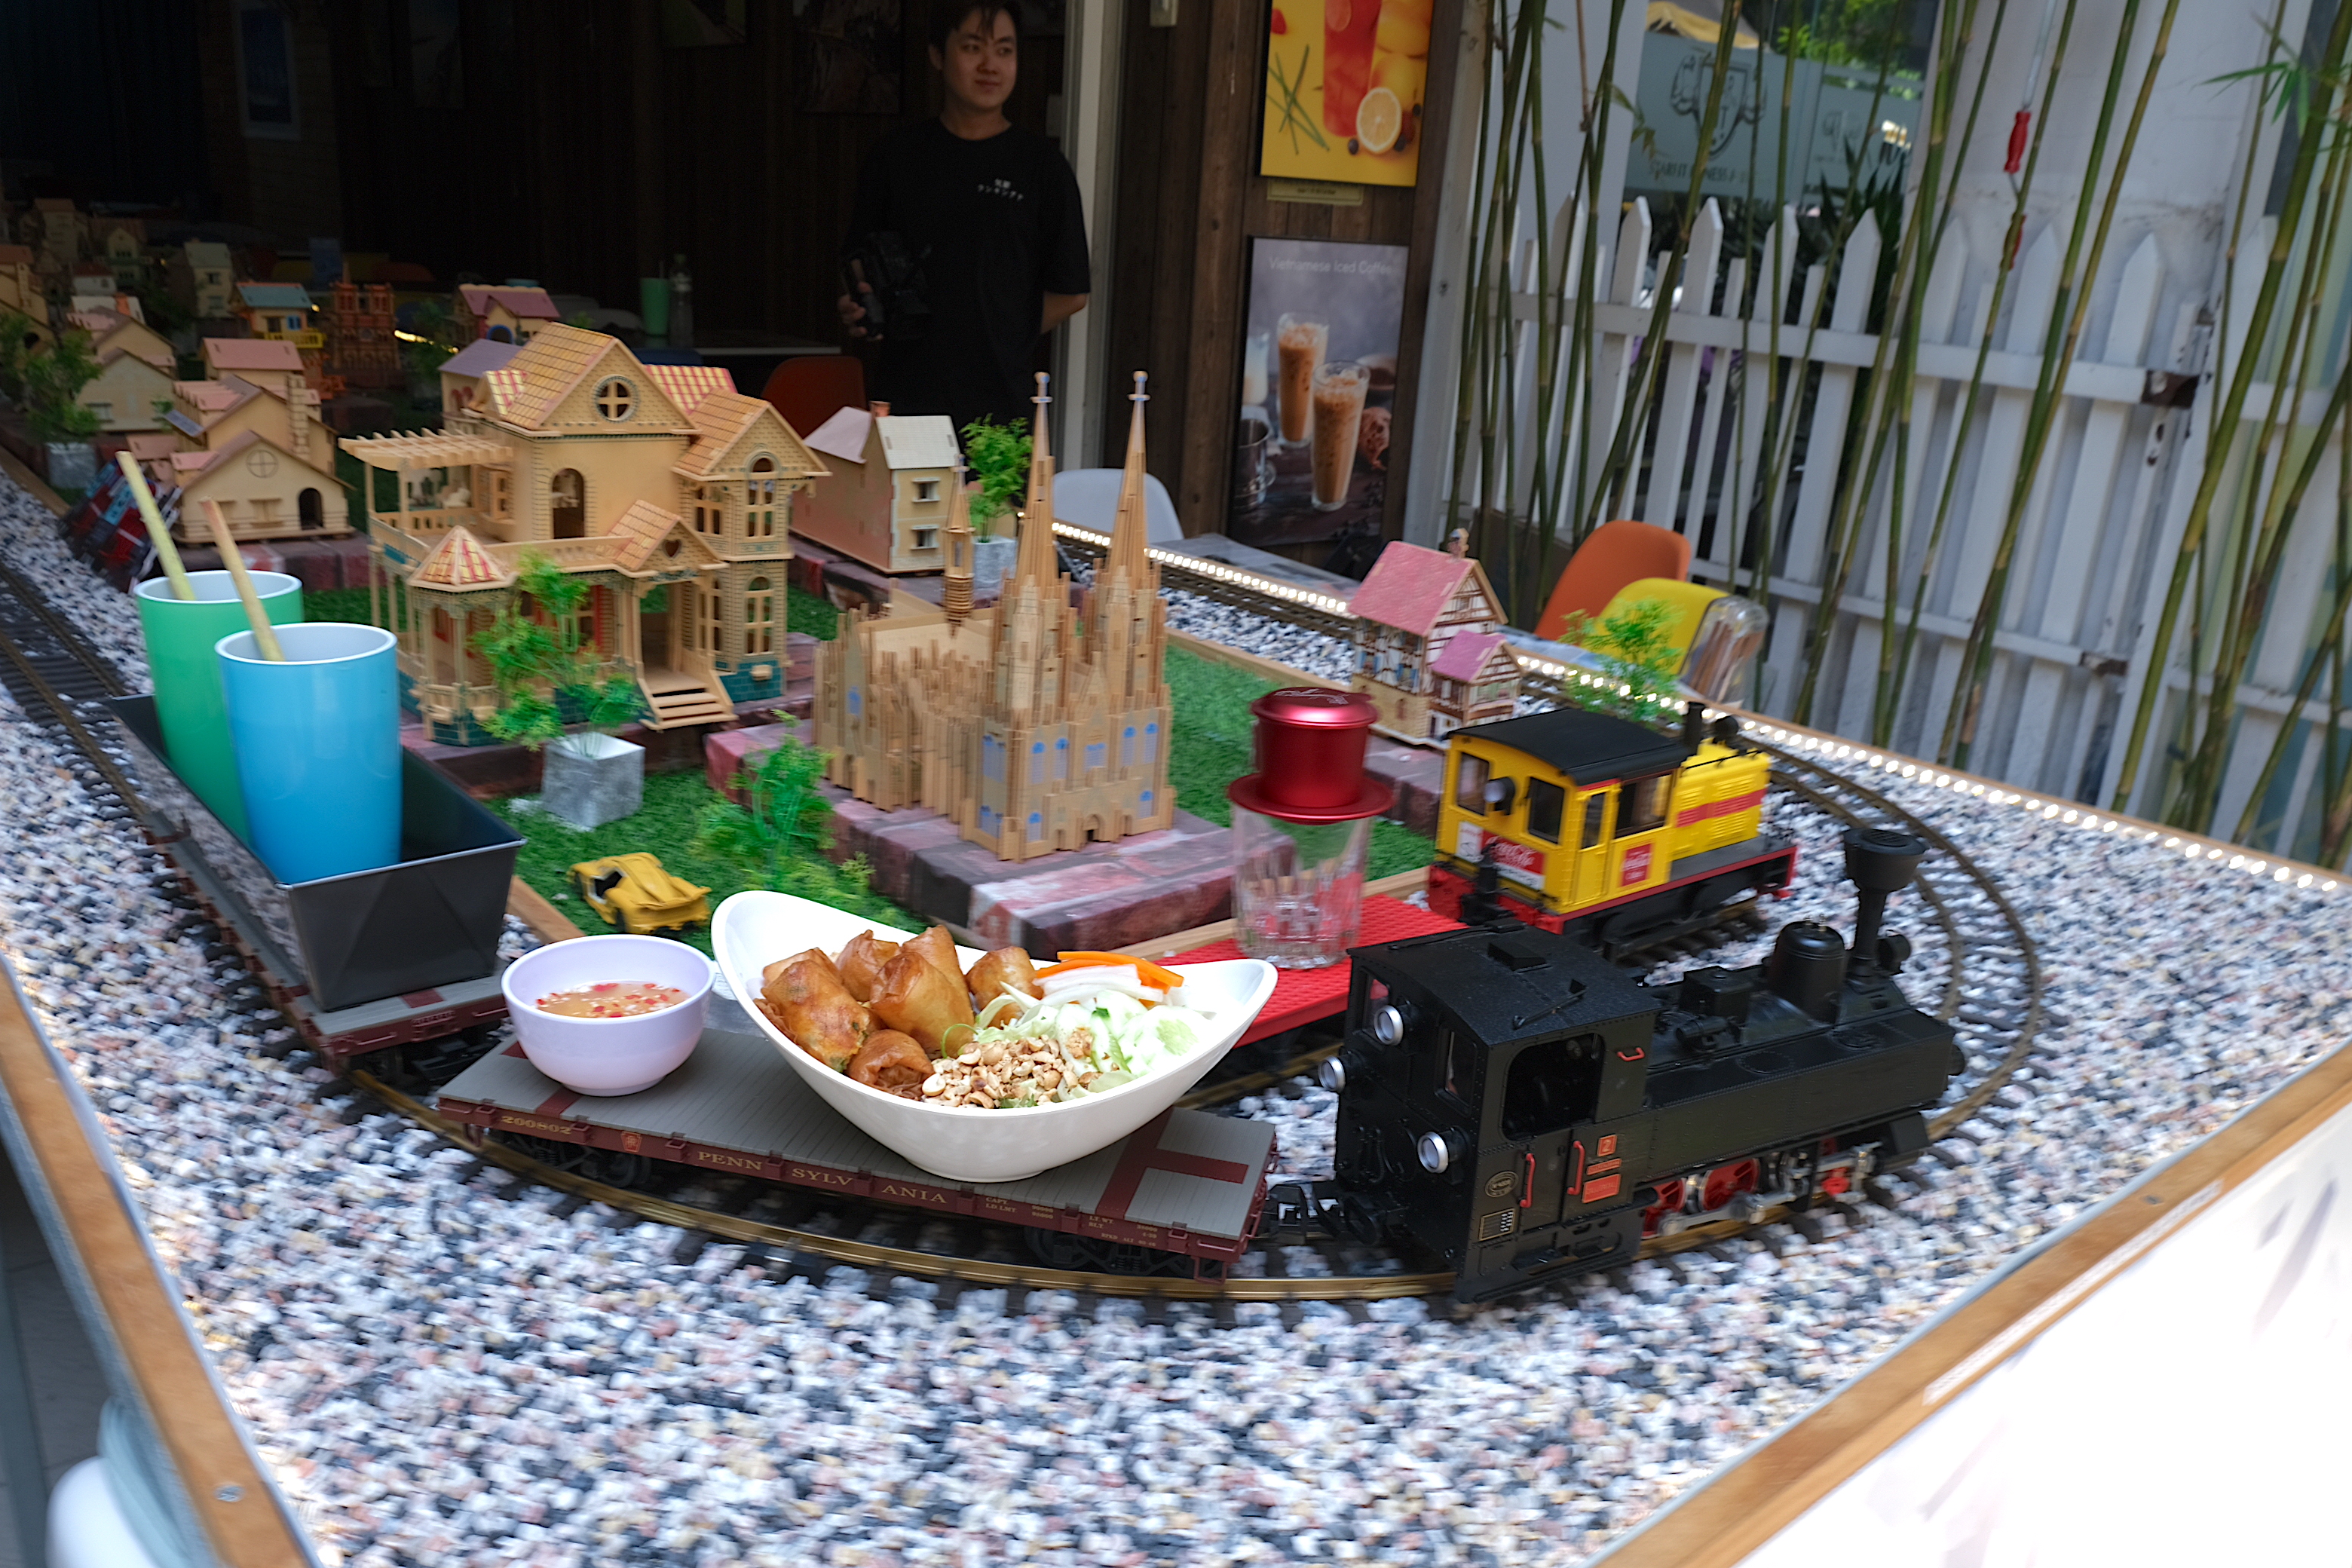 Check out the Ho Chi Minh City restaurant where food is served by model train